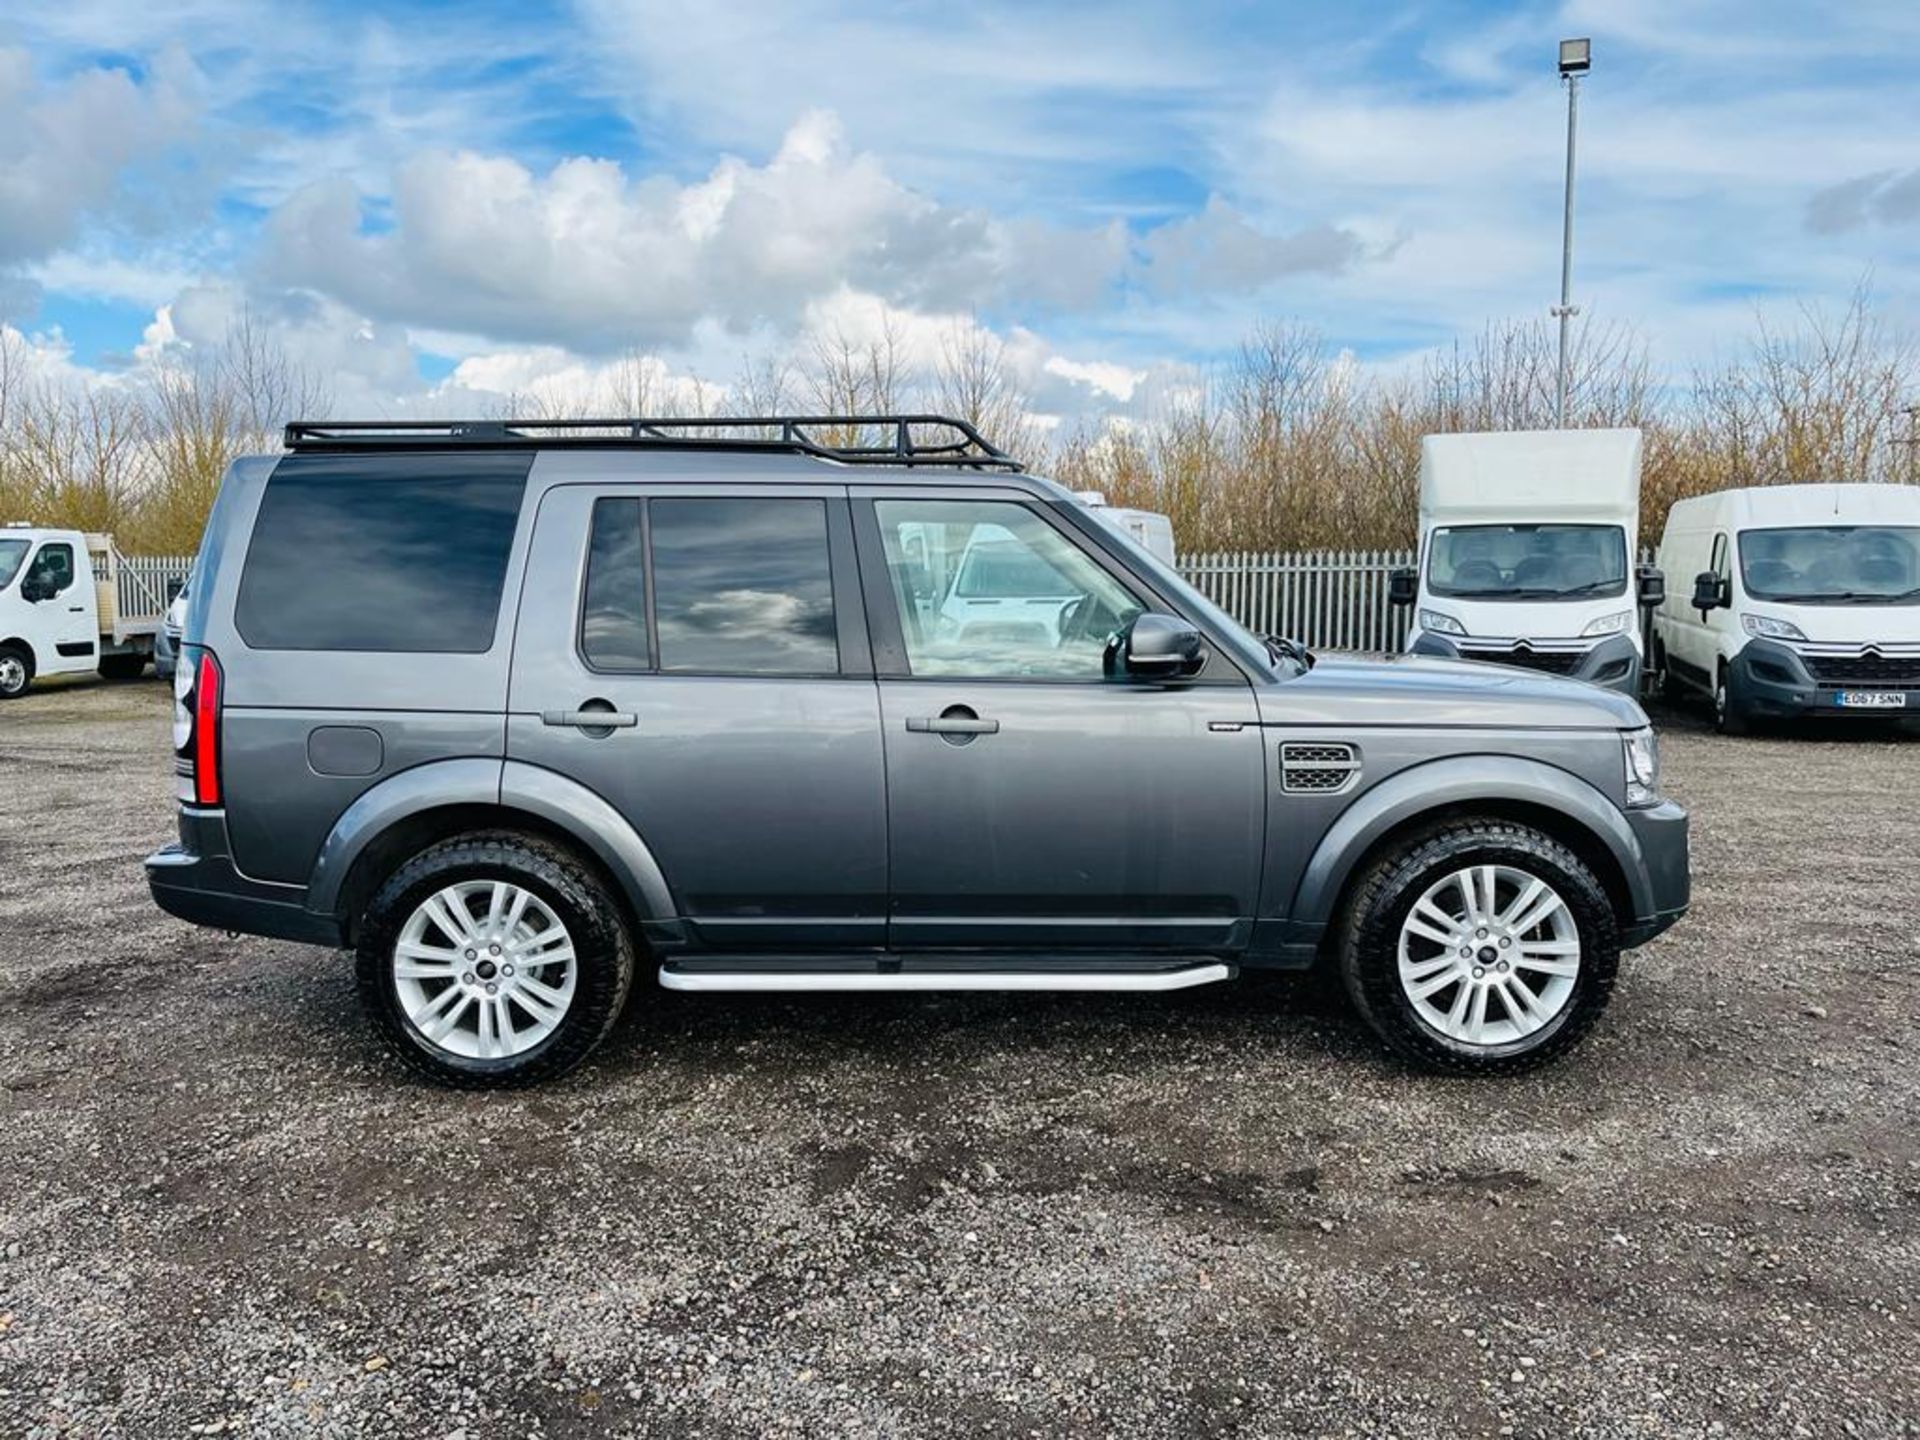 **ON SALE**Land Rover Discovery 3.0 SDV6 Auto SE 2016 '65 Reg' Sat Nav - 4WD - A/C -Only 97214 Miles - Image 10 of 26